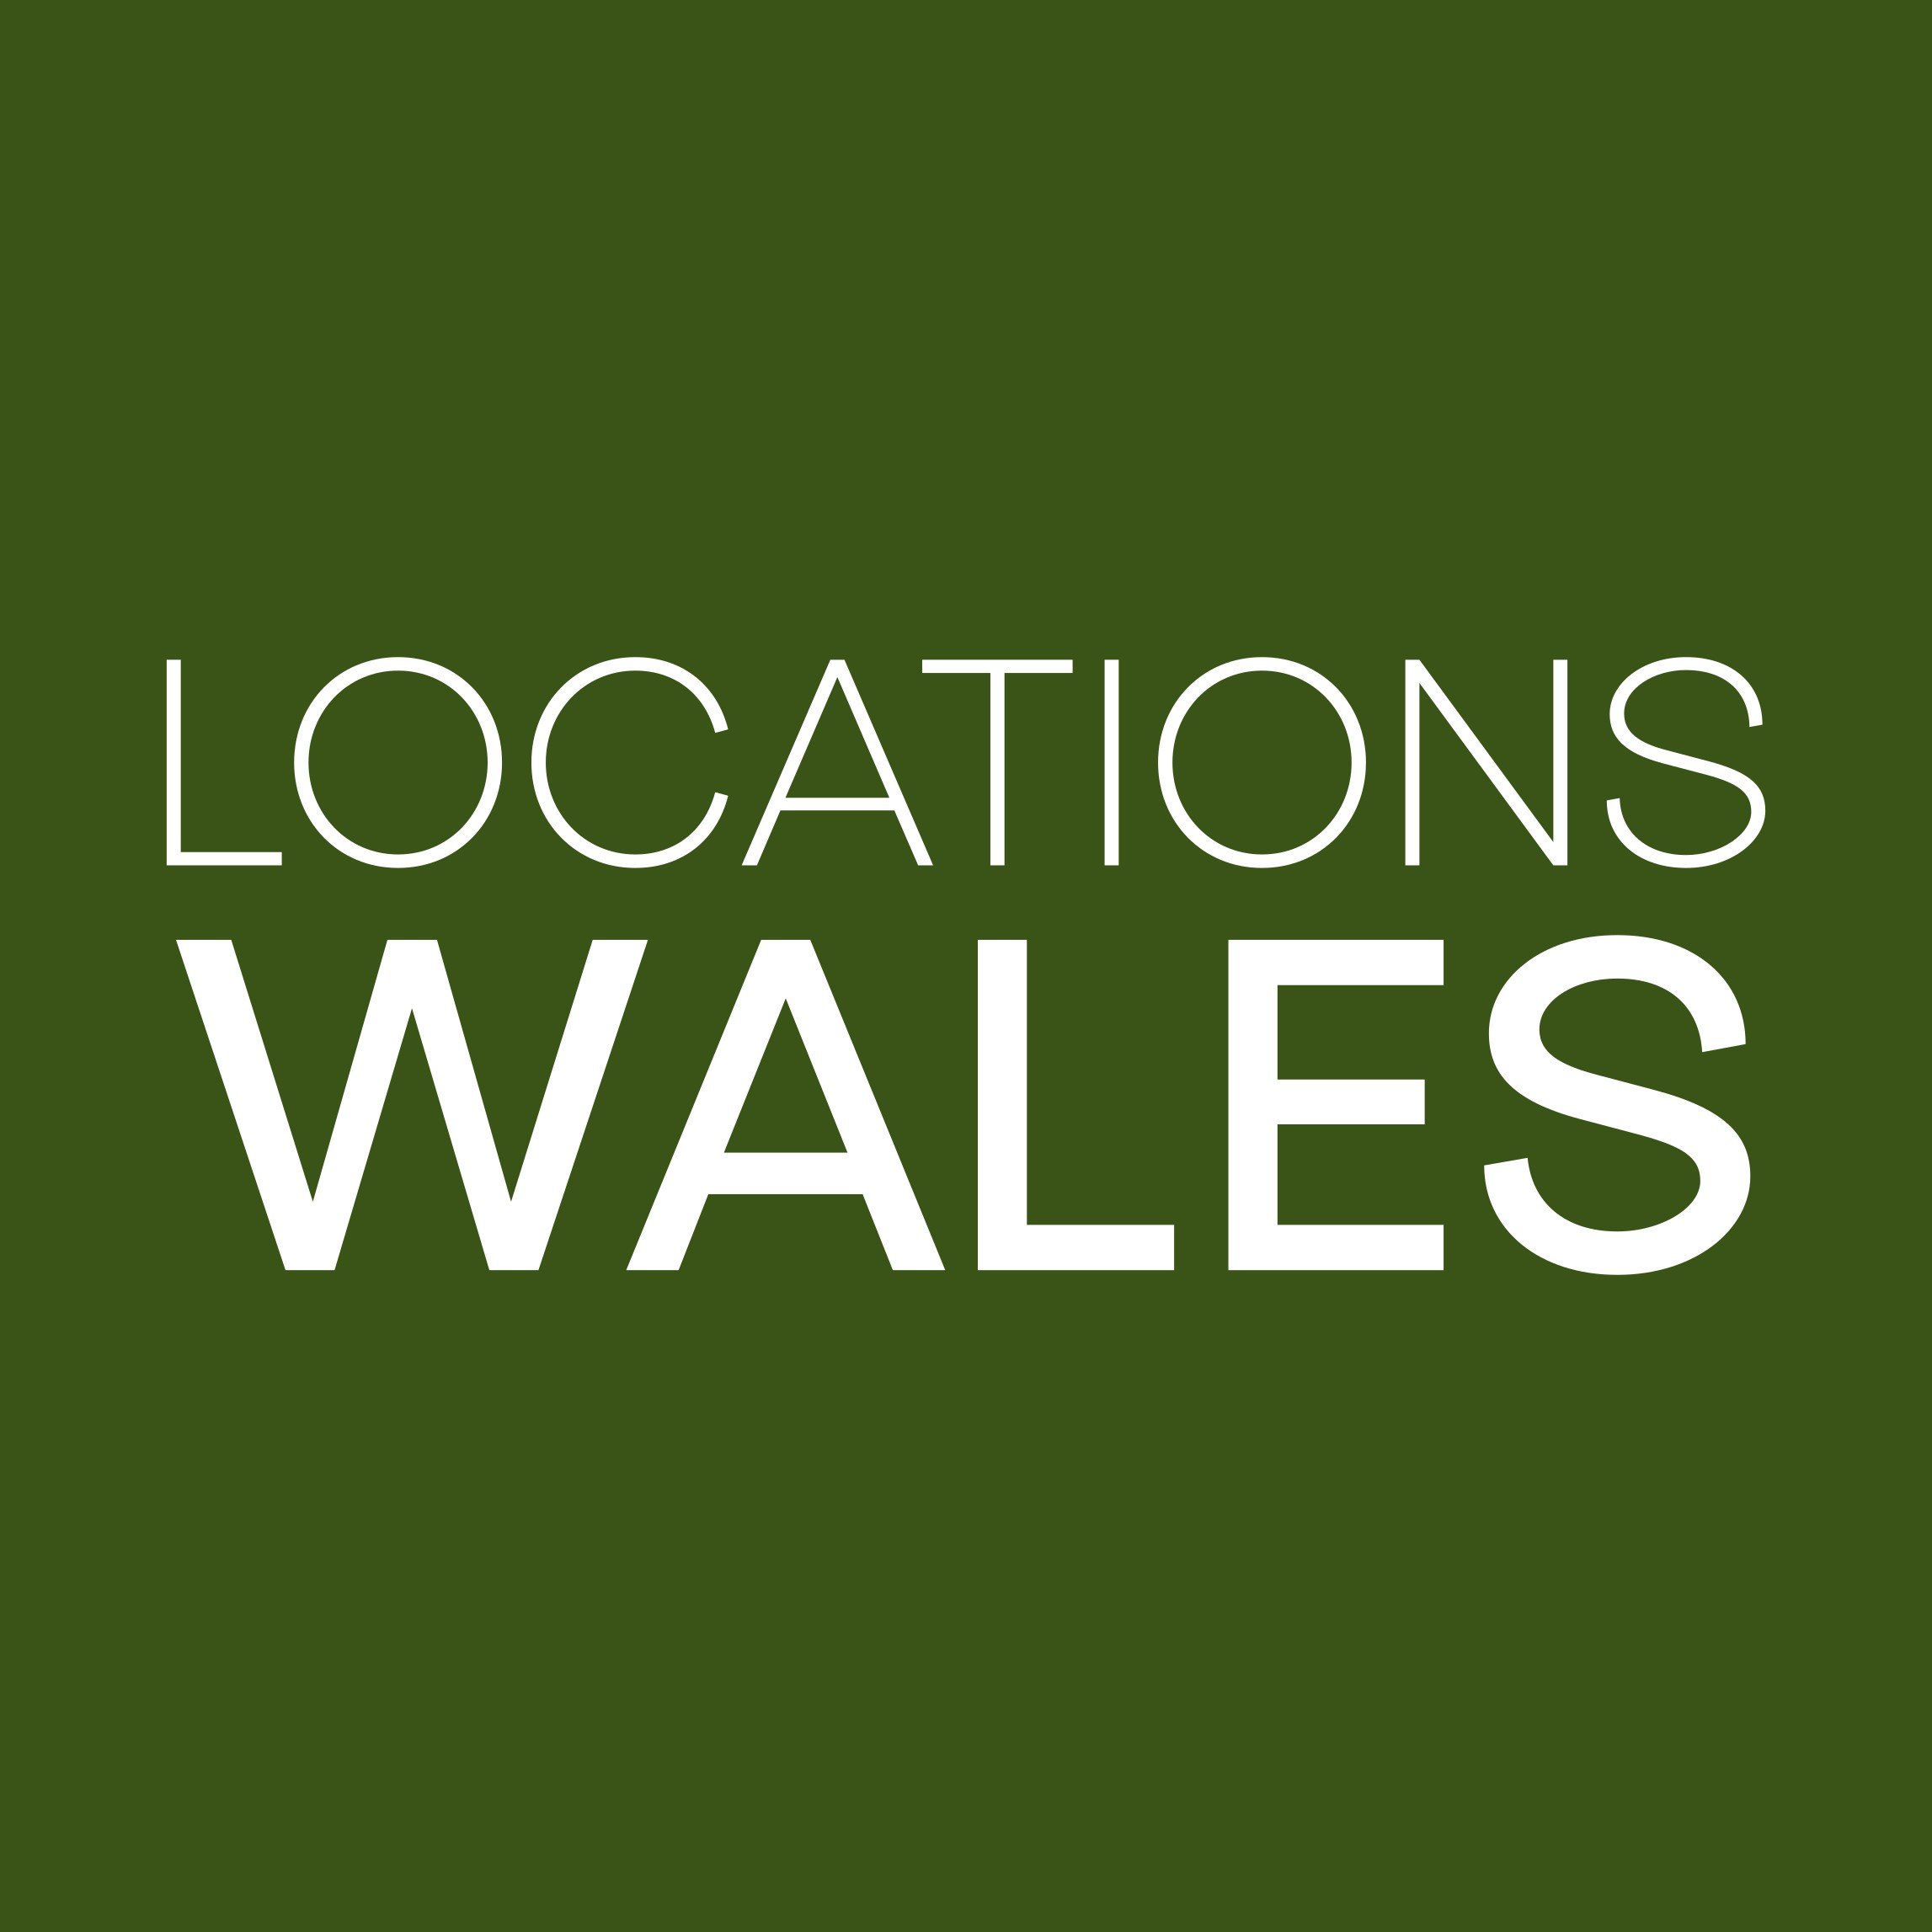 Locations Wales 